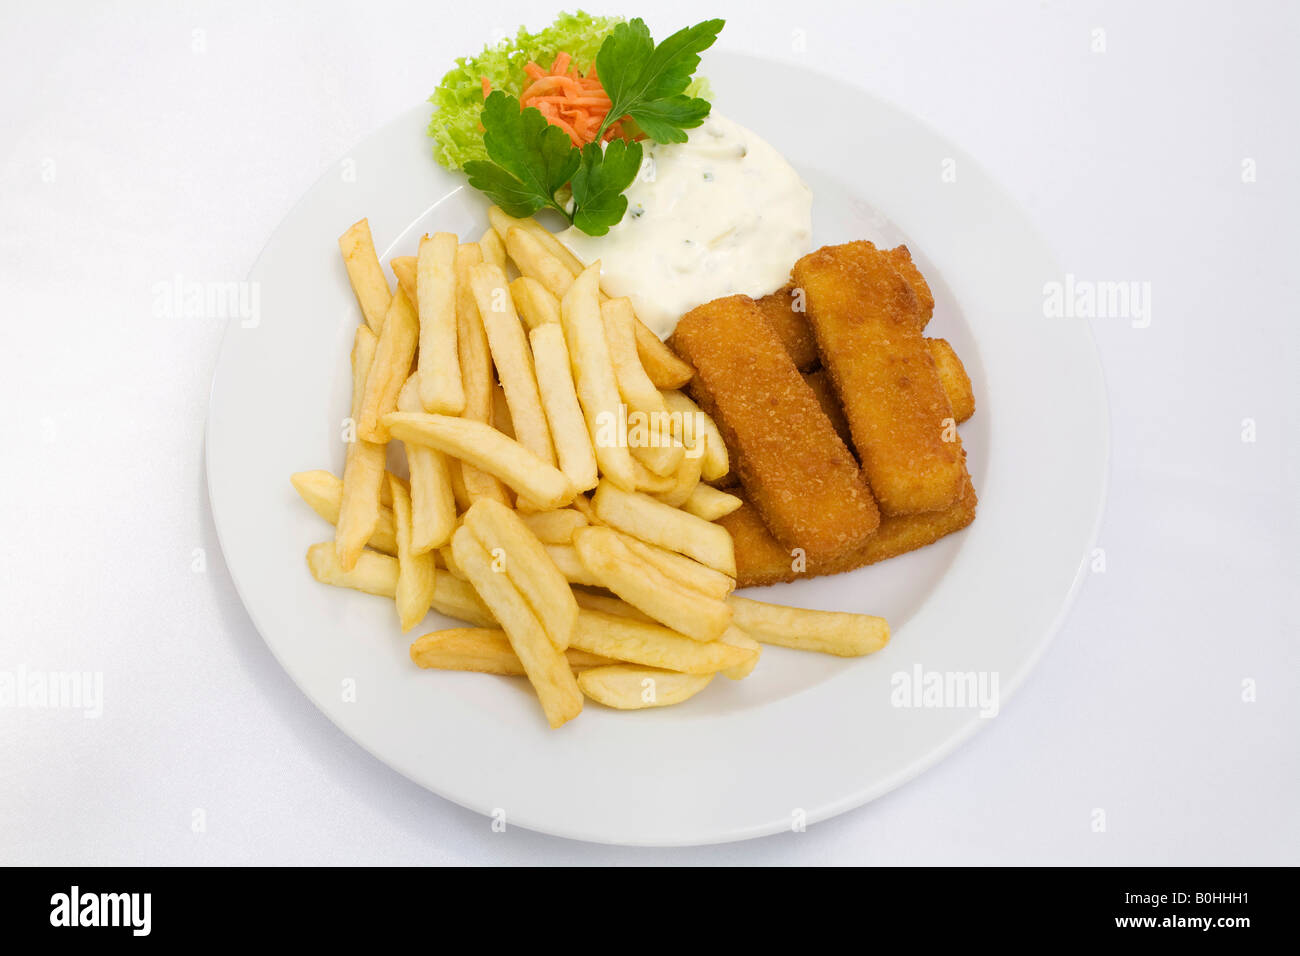 Fish sticks, tartar sauce and french fries served on a white plate Stock Photo